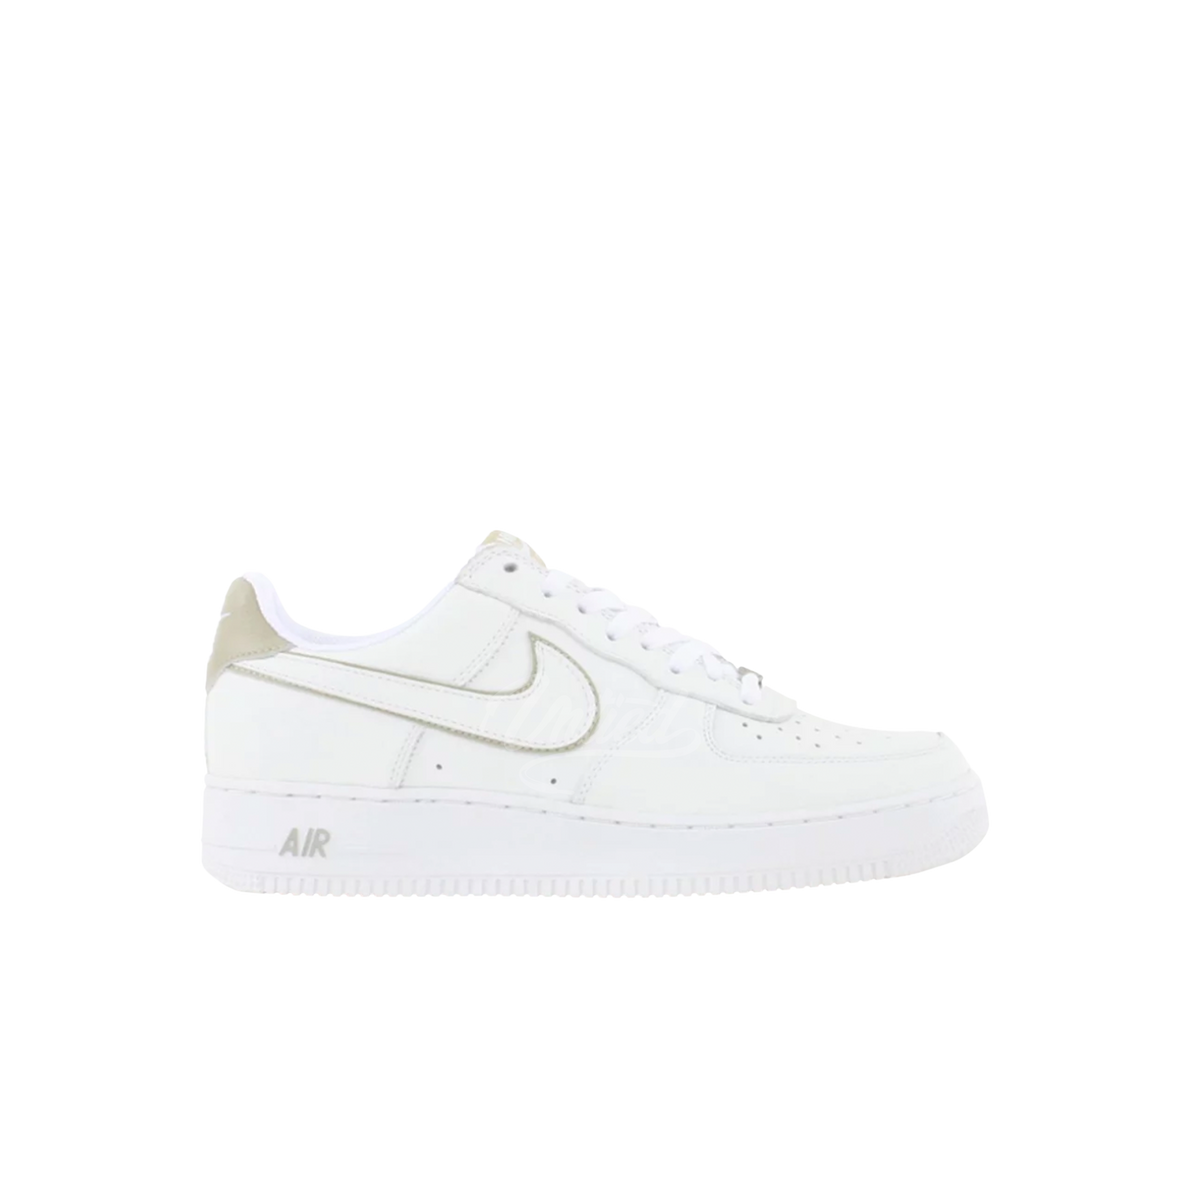 Air Force 1 "White/Light Stone"